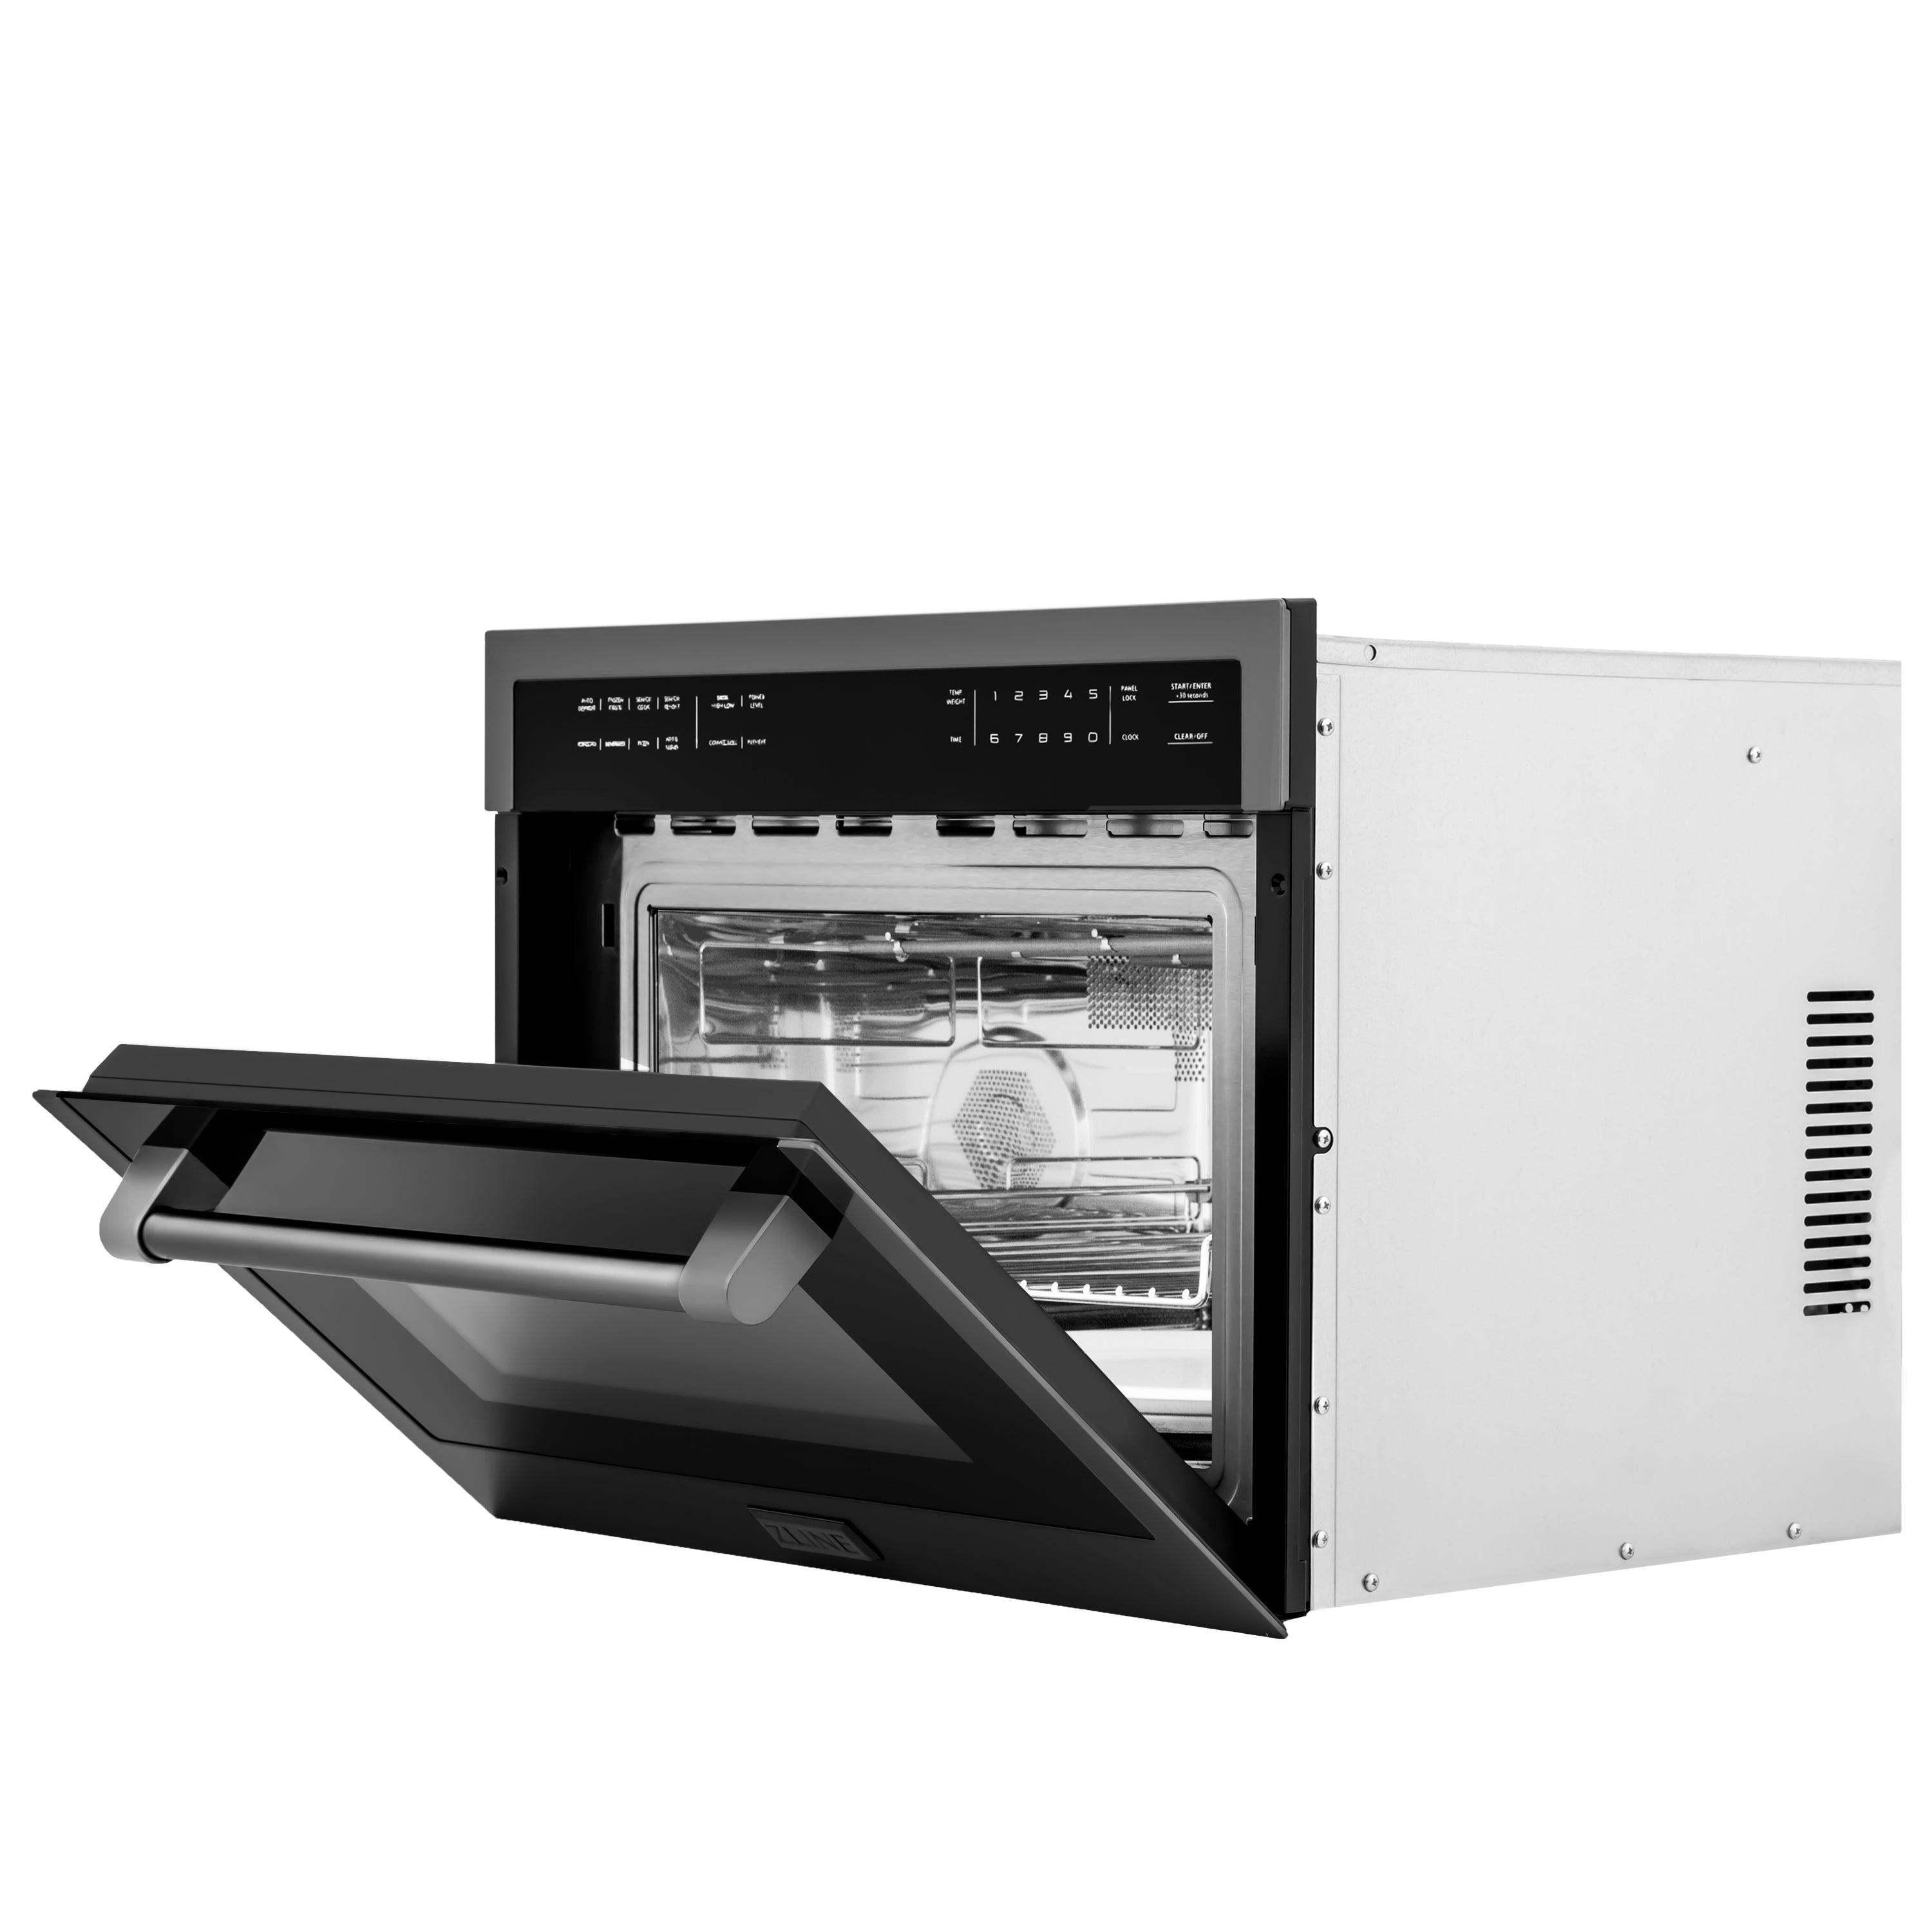 ZLINE 24 in. Black Stainless Steel Built-in Convection Microwave Oven with Speed and Sensor Cooking (MWO-24-BS) Side View Door Partially Open